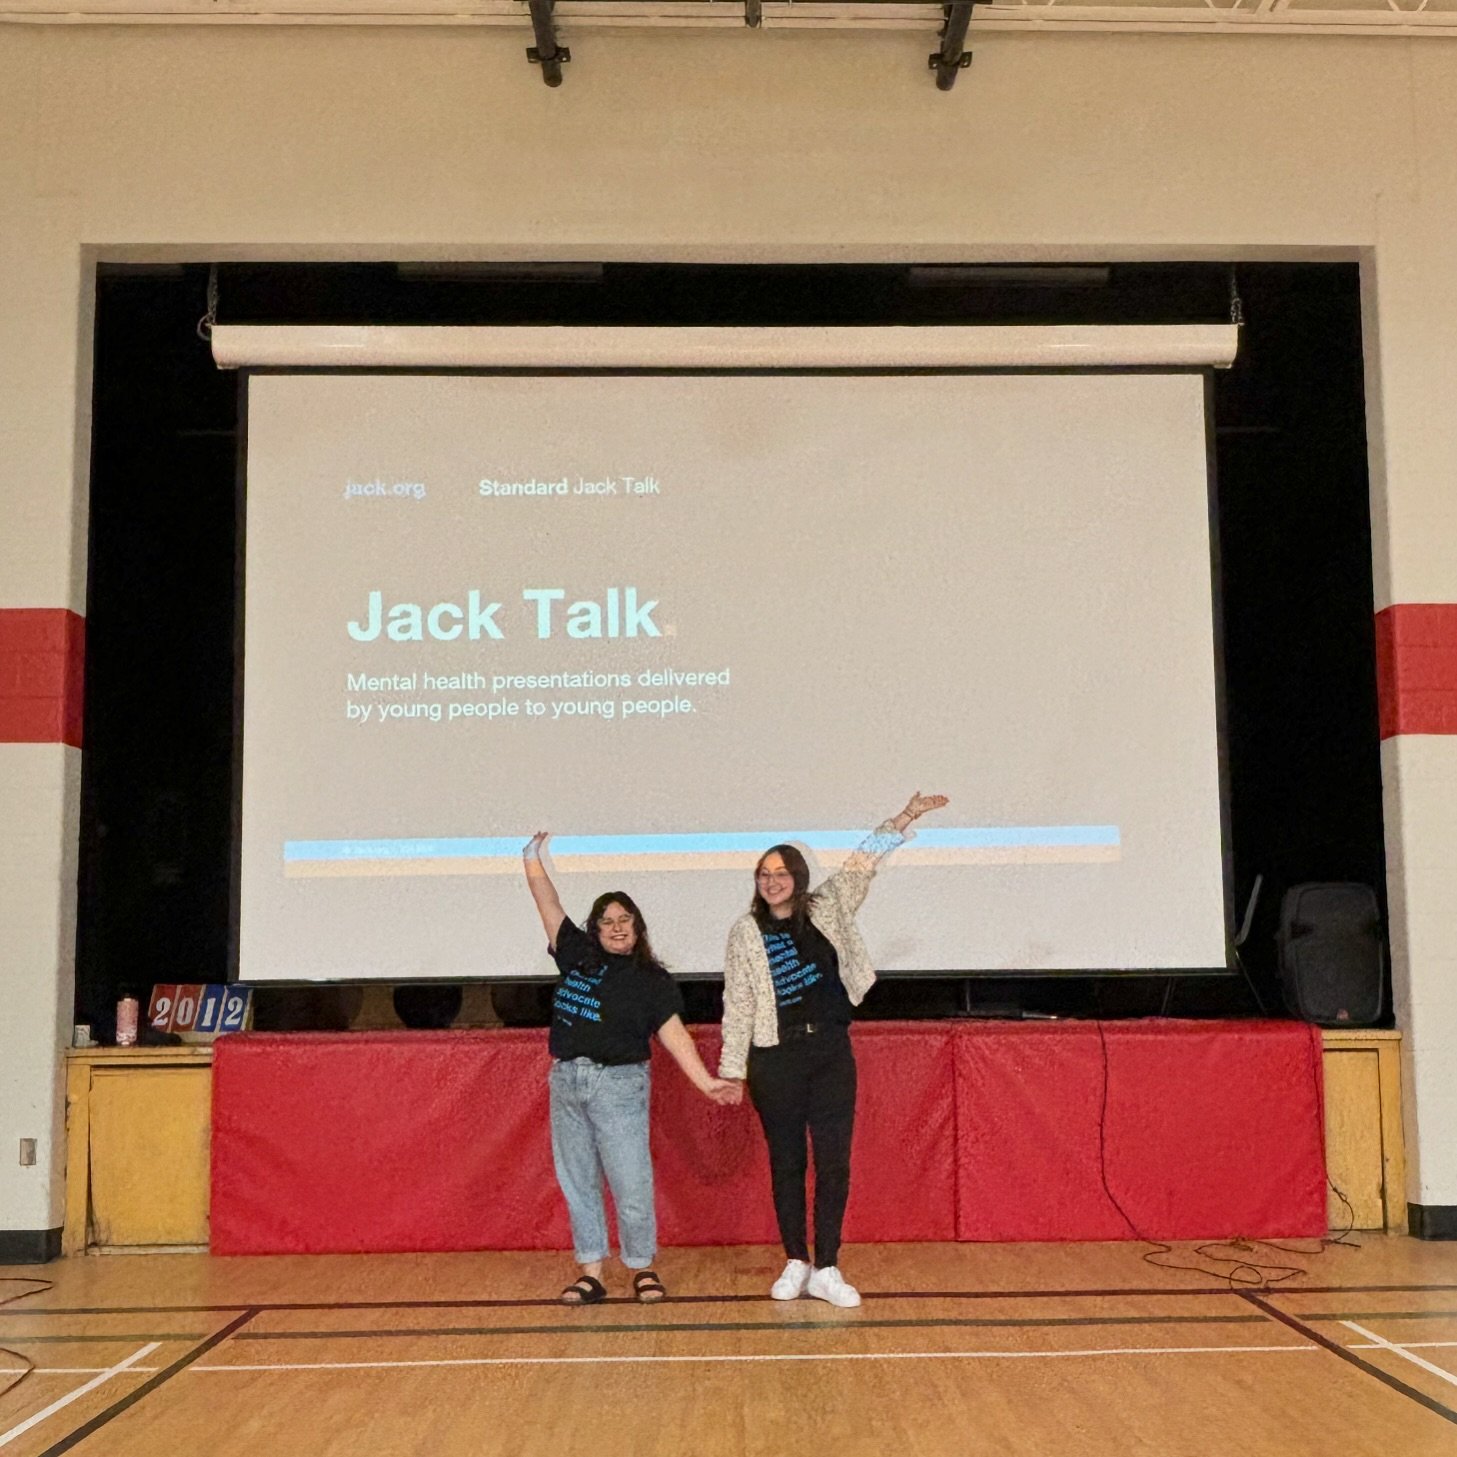 Kicked off mental health month workshops with a Jack Talk in Owen Sound, at Hillcrest Elementary School! 🎤💙 @jackdotorg @alexandrarodgers_